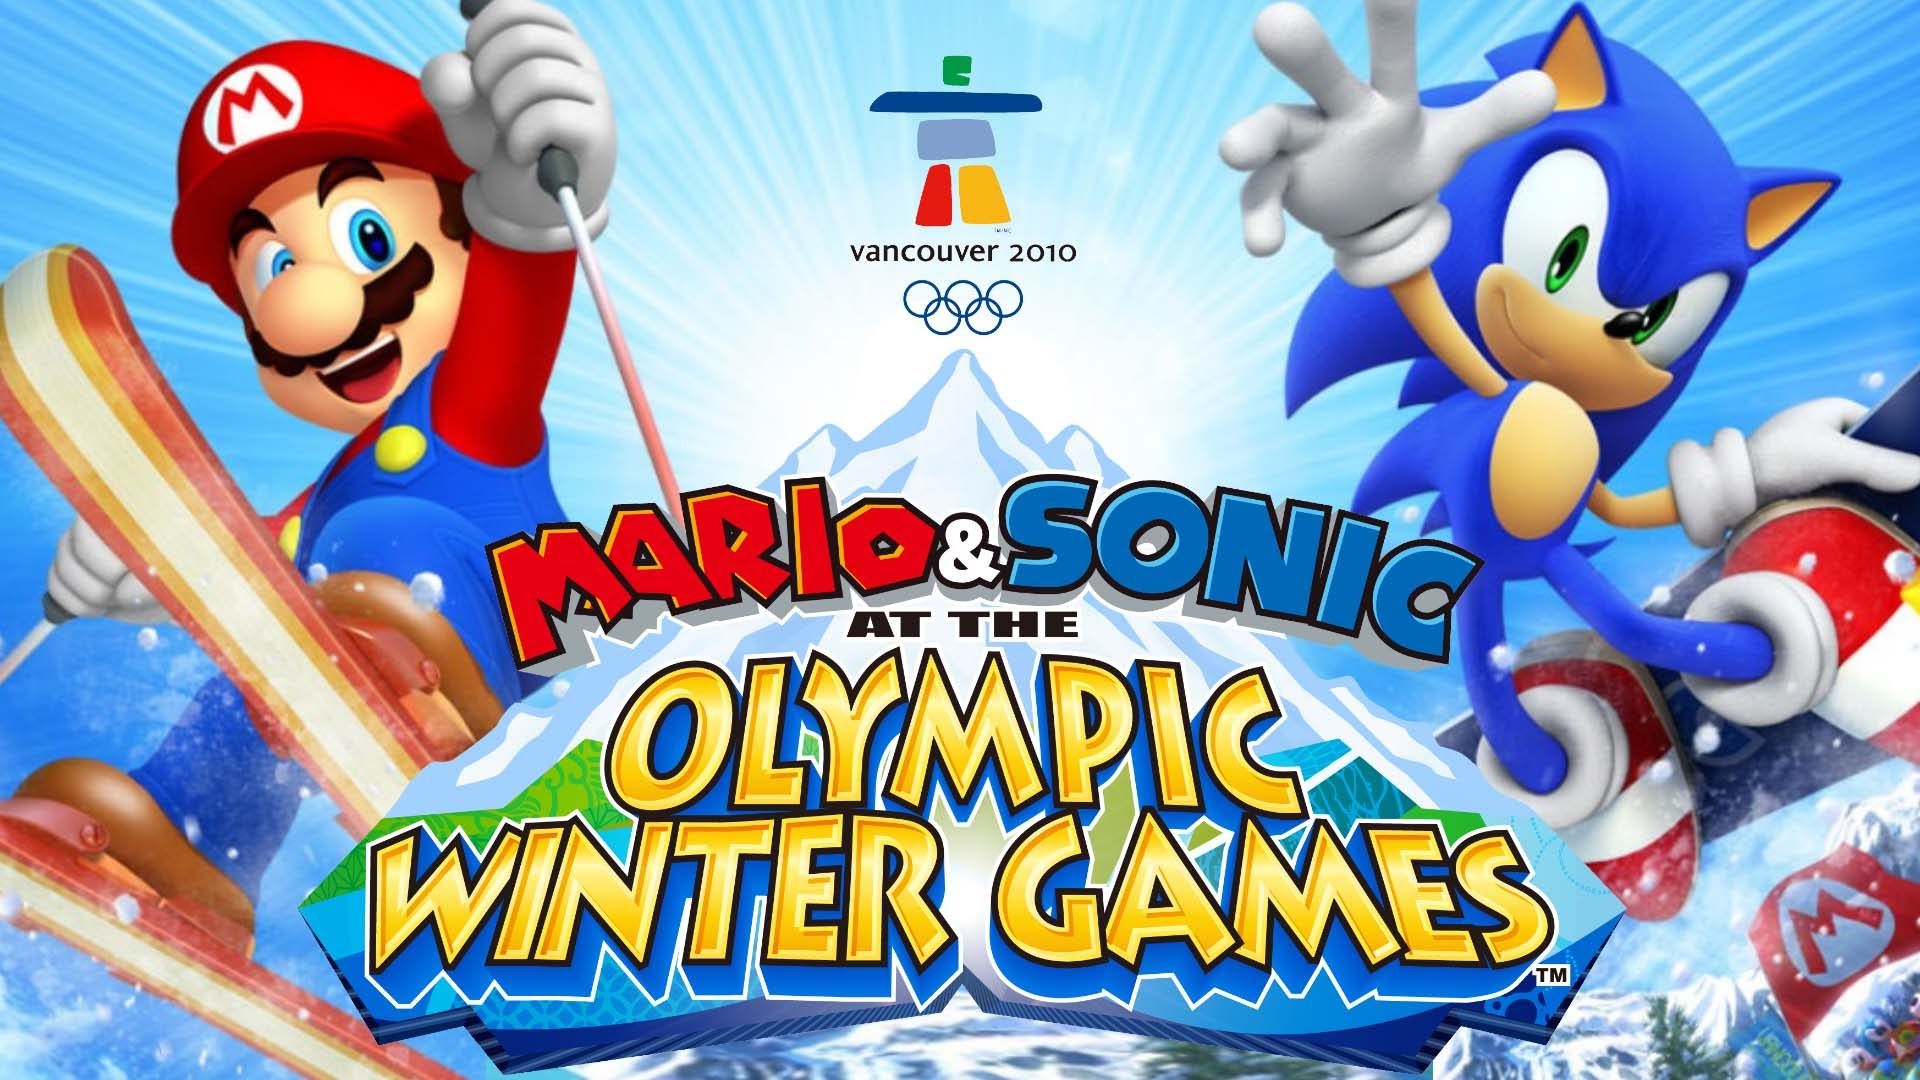 Most viewed Mario & Sonic At The Olympic Winter Games wallpaper